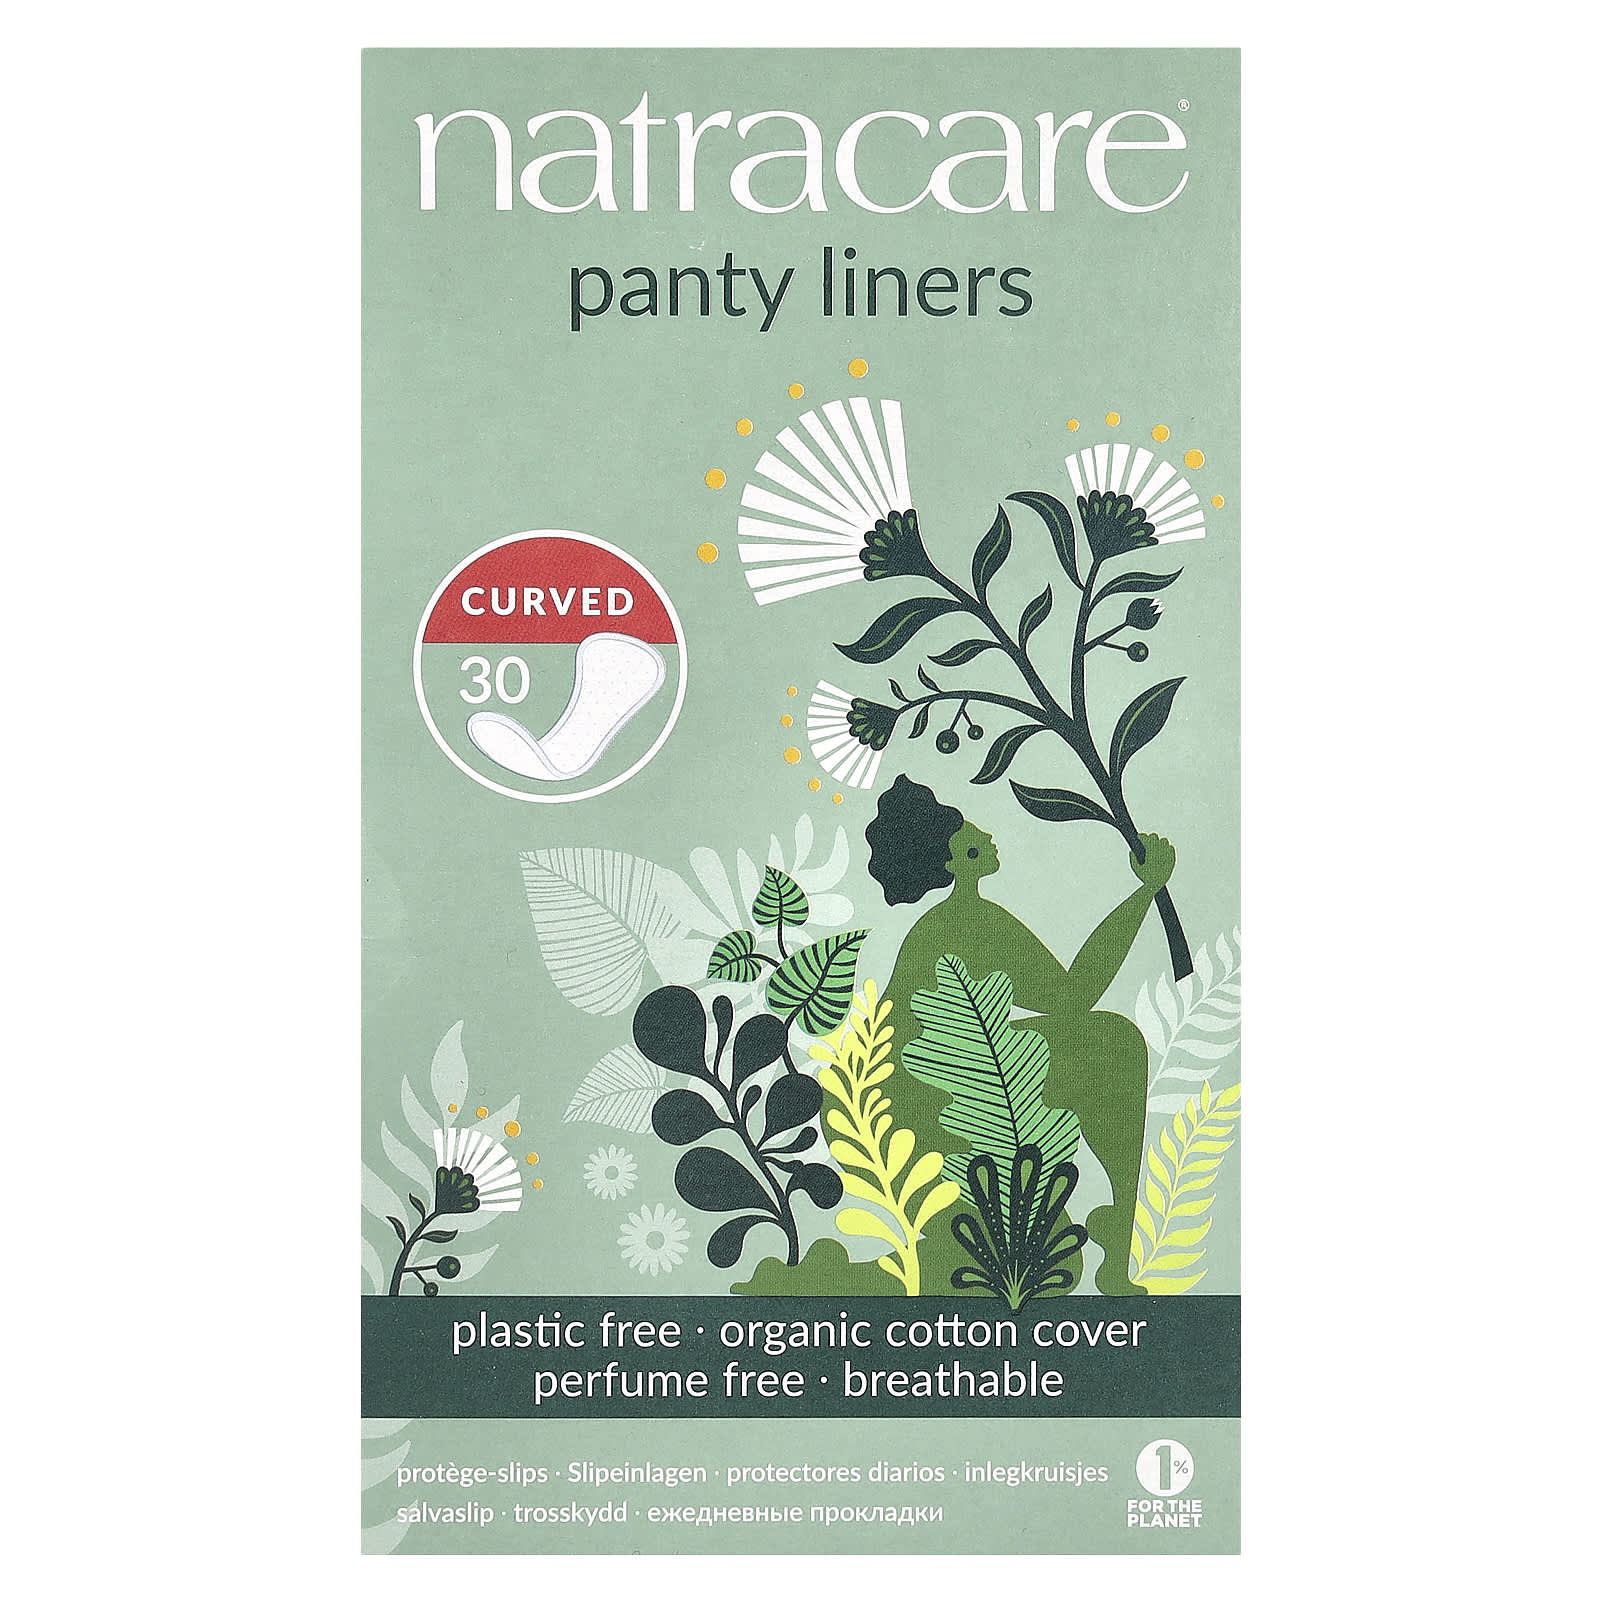 Always Dailies Organic Cotton Protection Normal Panty Liners 28 per pack